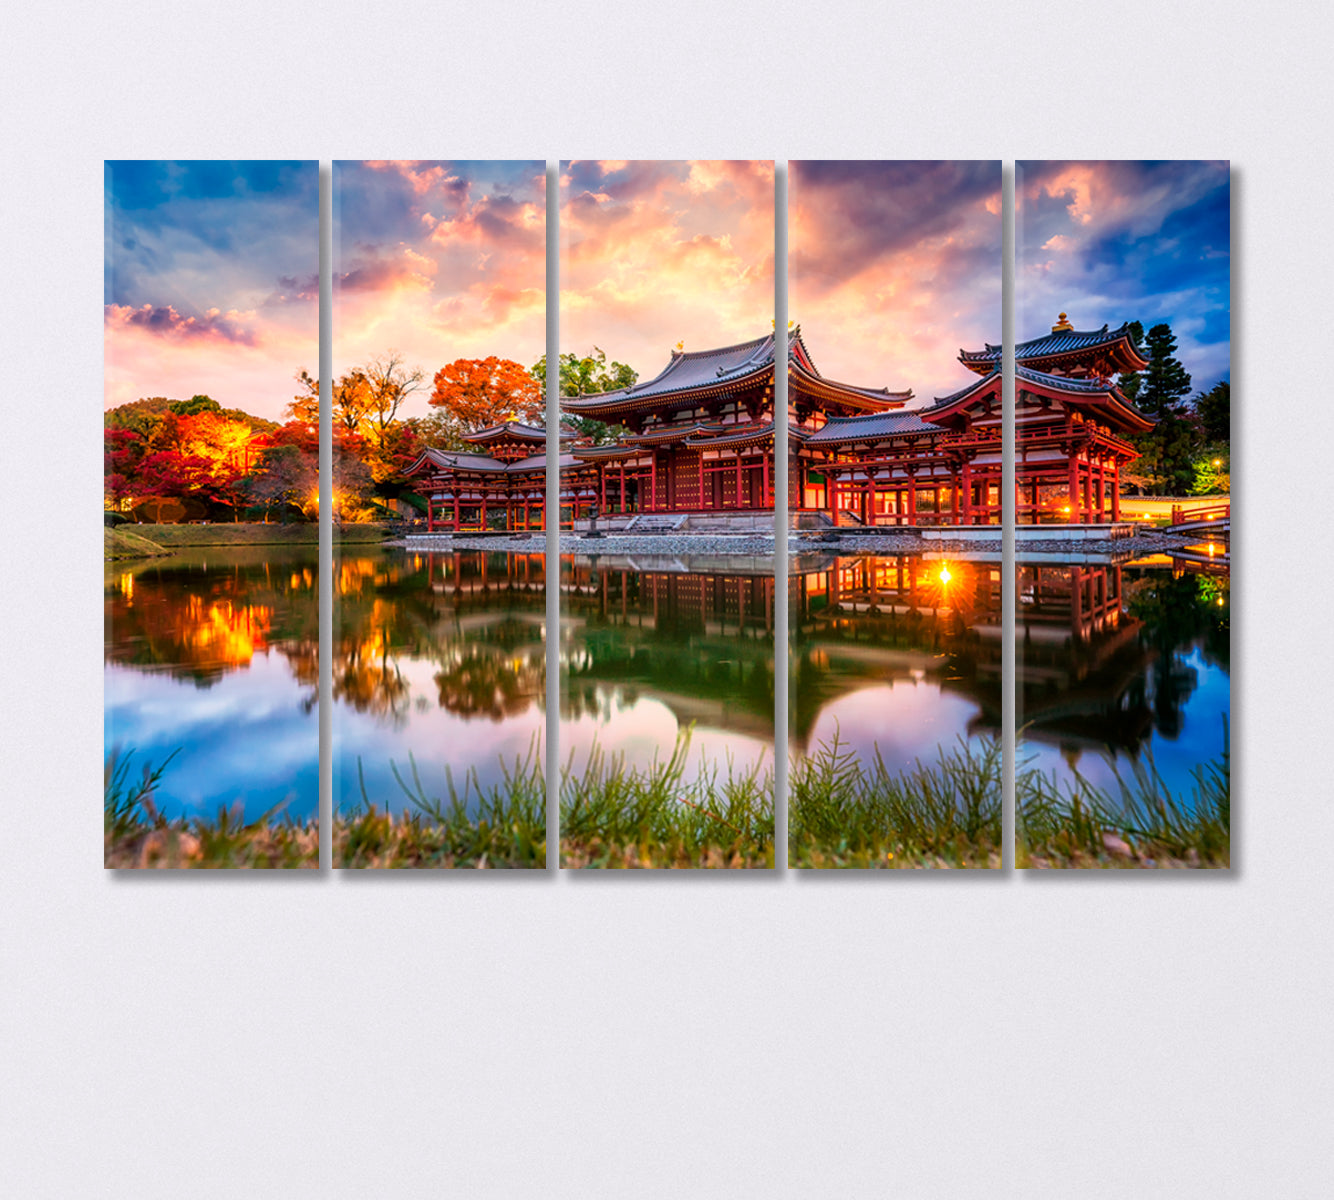 Byodo-in Buddhist Temple in Uji Japan Canvas Print-Canvas Print-CetArt-5 Panels-36x24 inches-CetArt